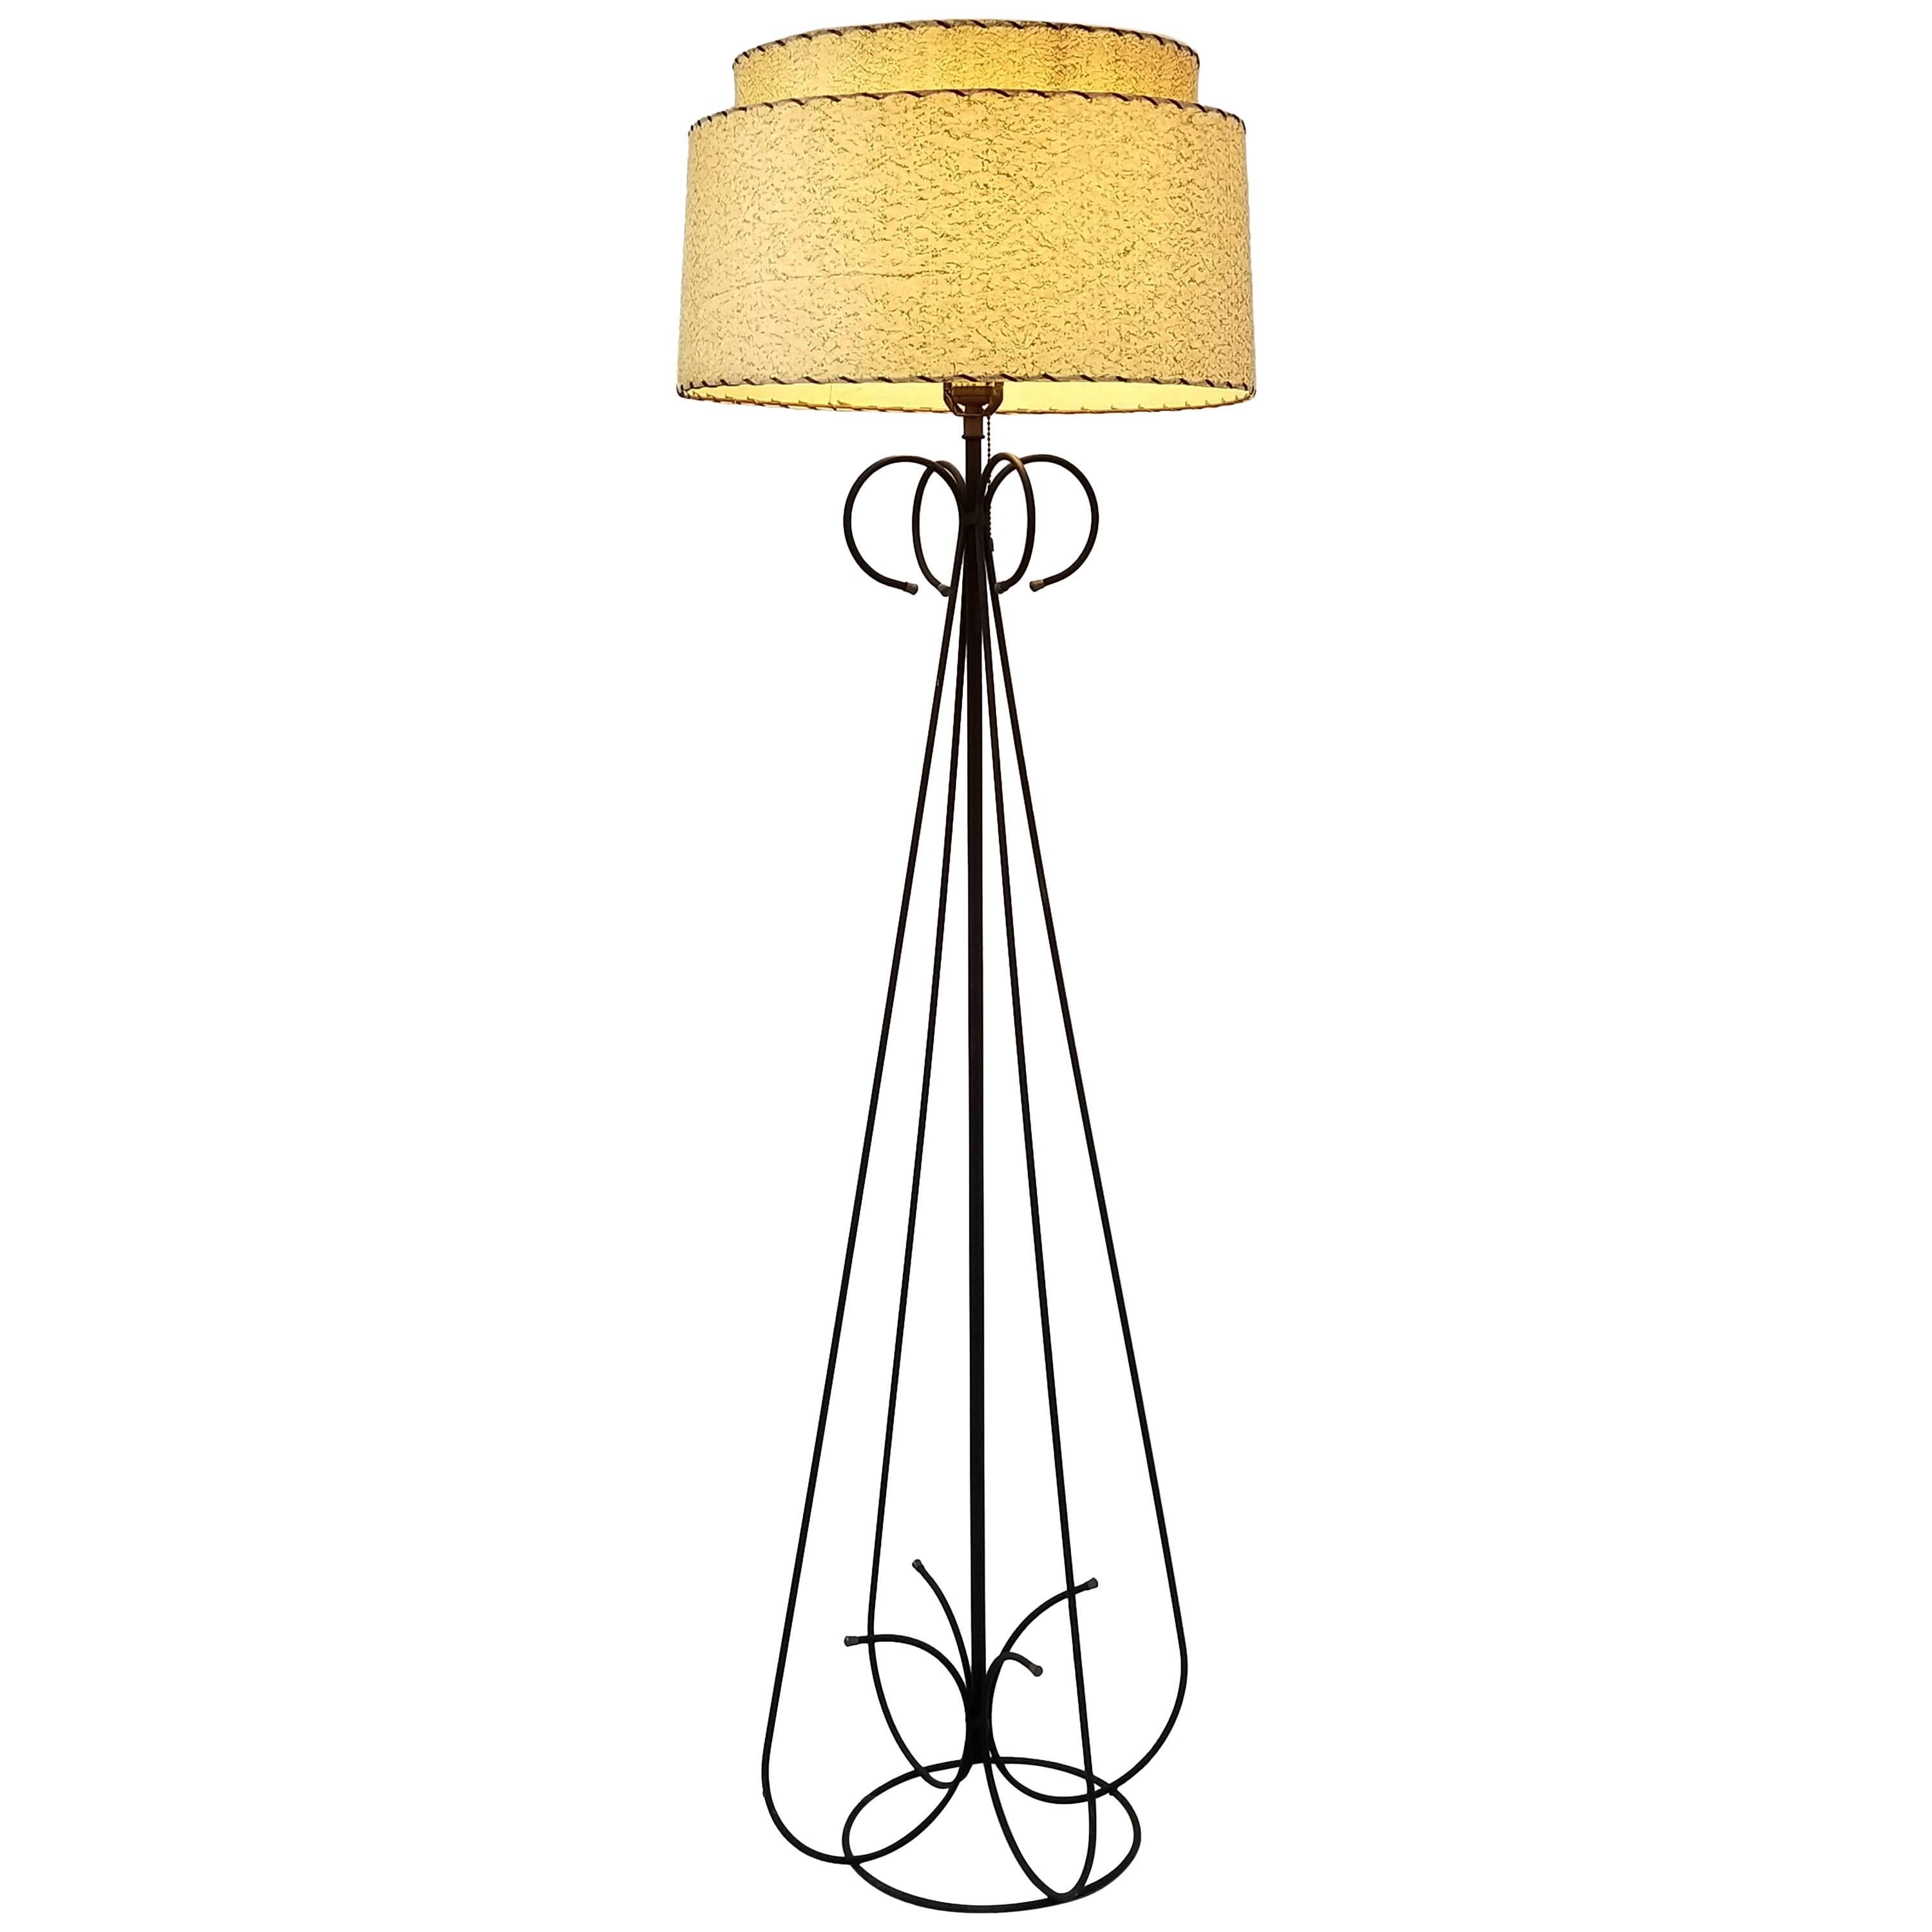 1950s Wire Floor Lamp in the Style of Tony Paul, USA For Sale